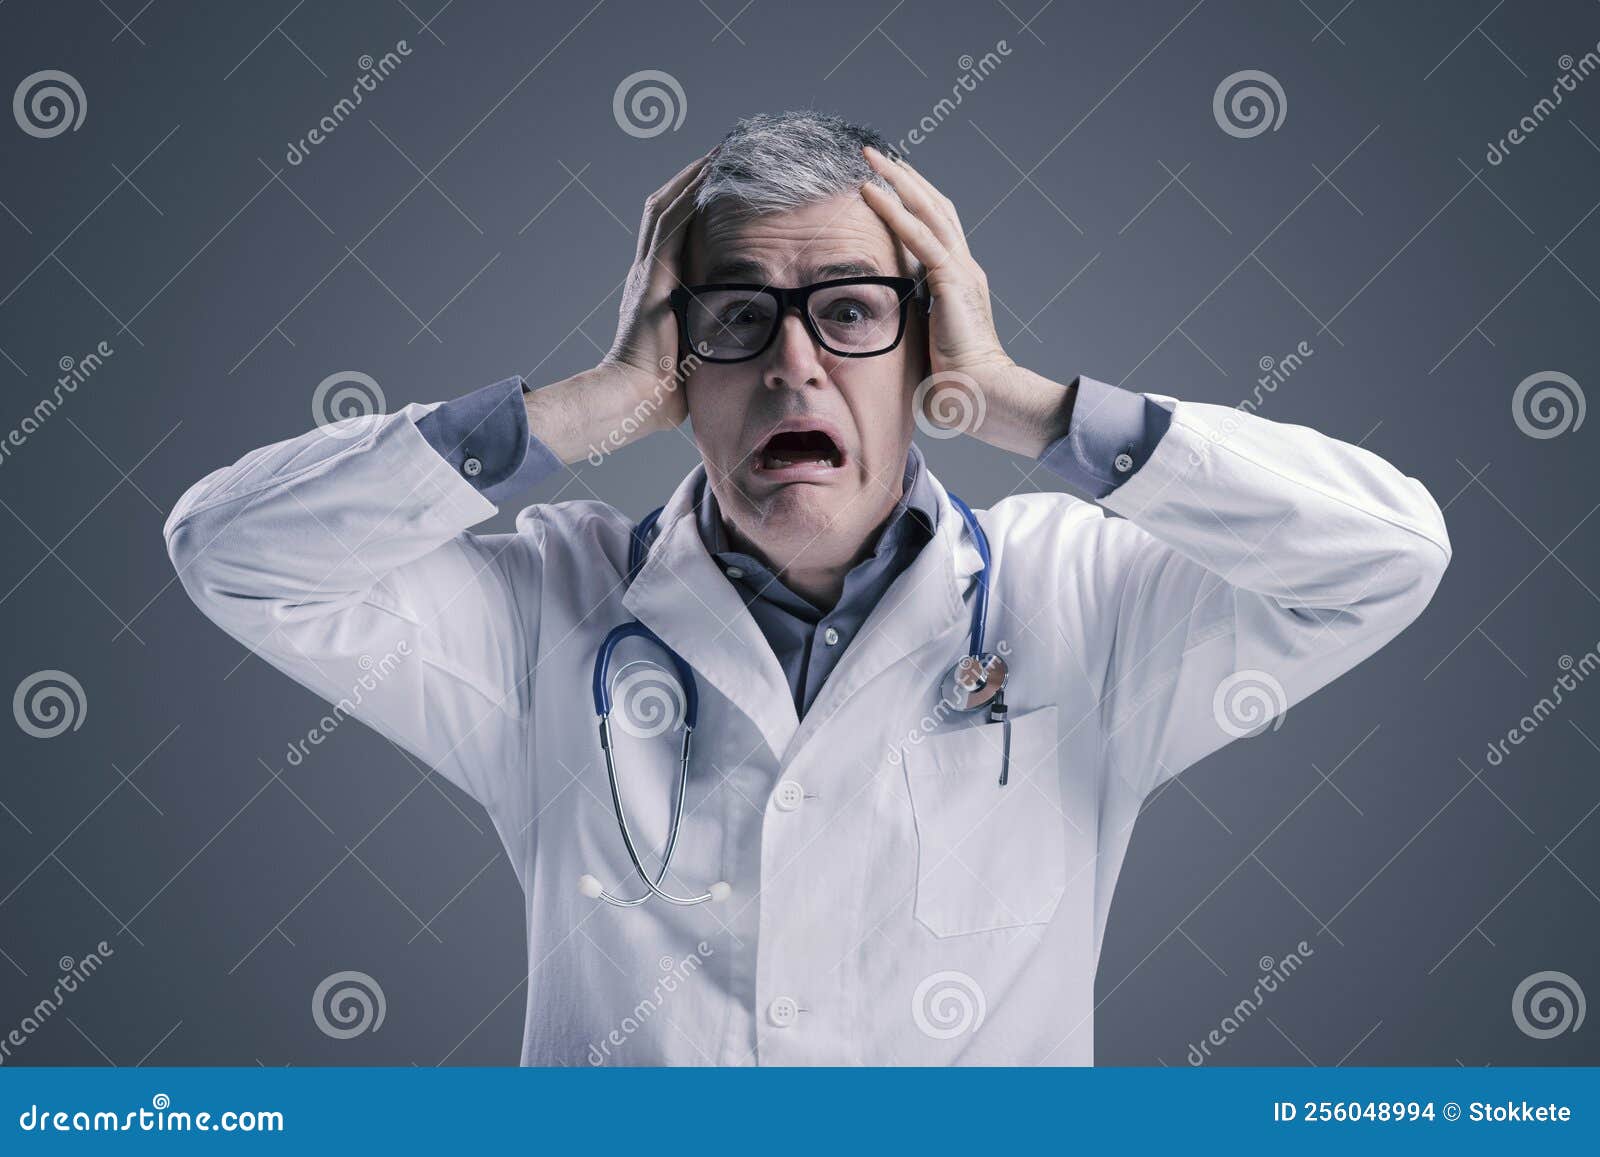 panicked doctor with head in hands